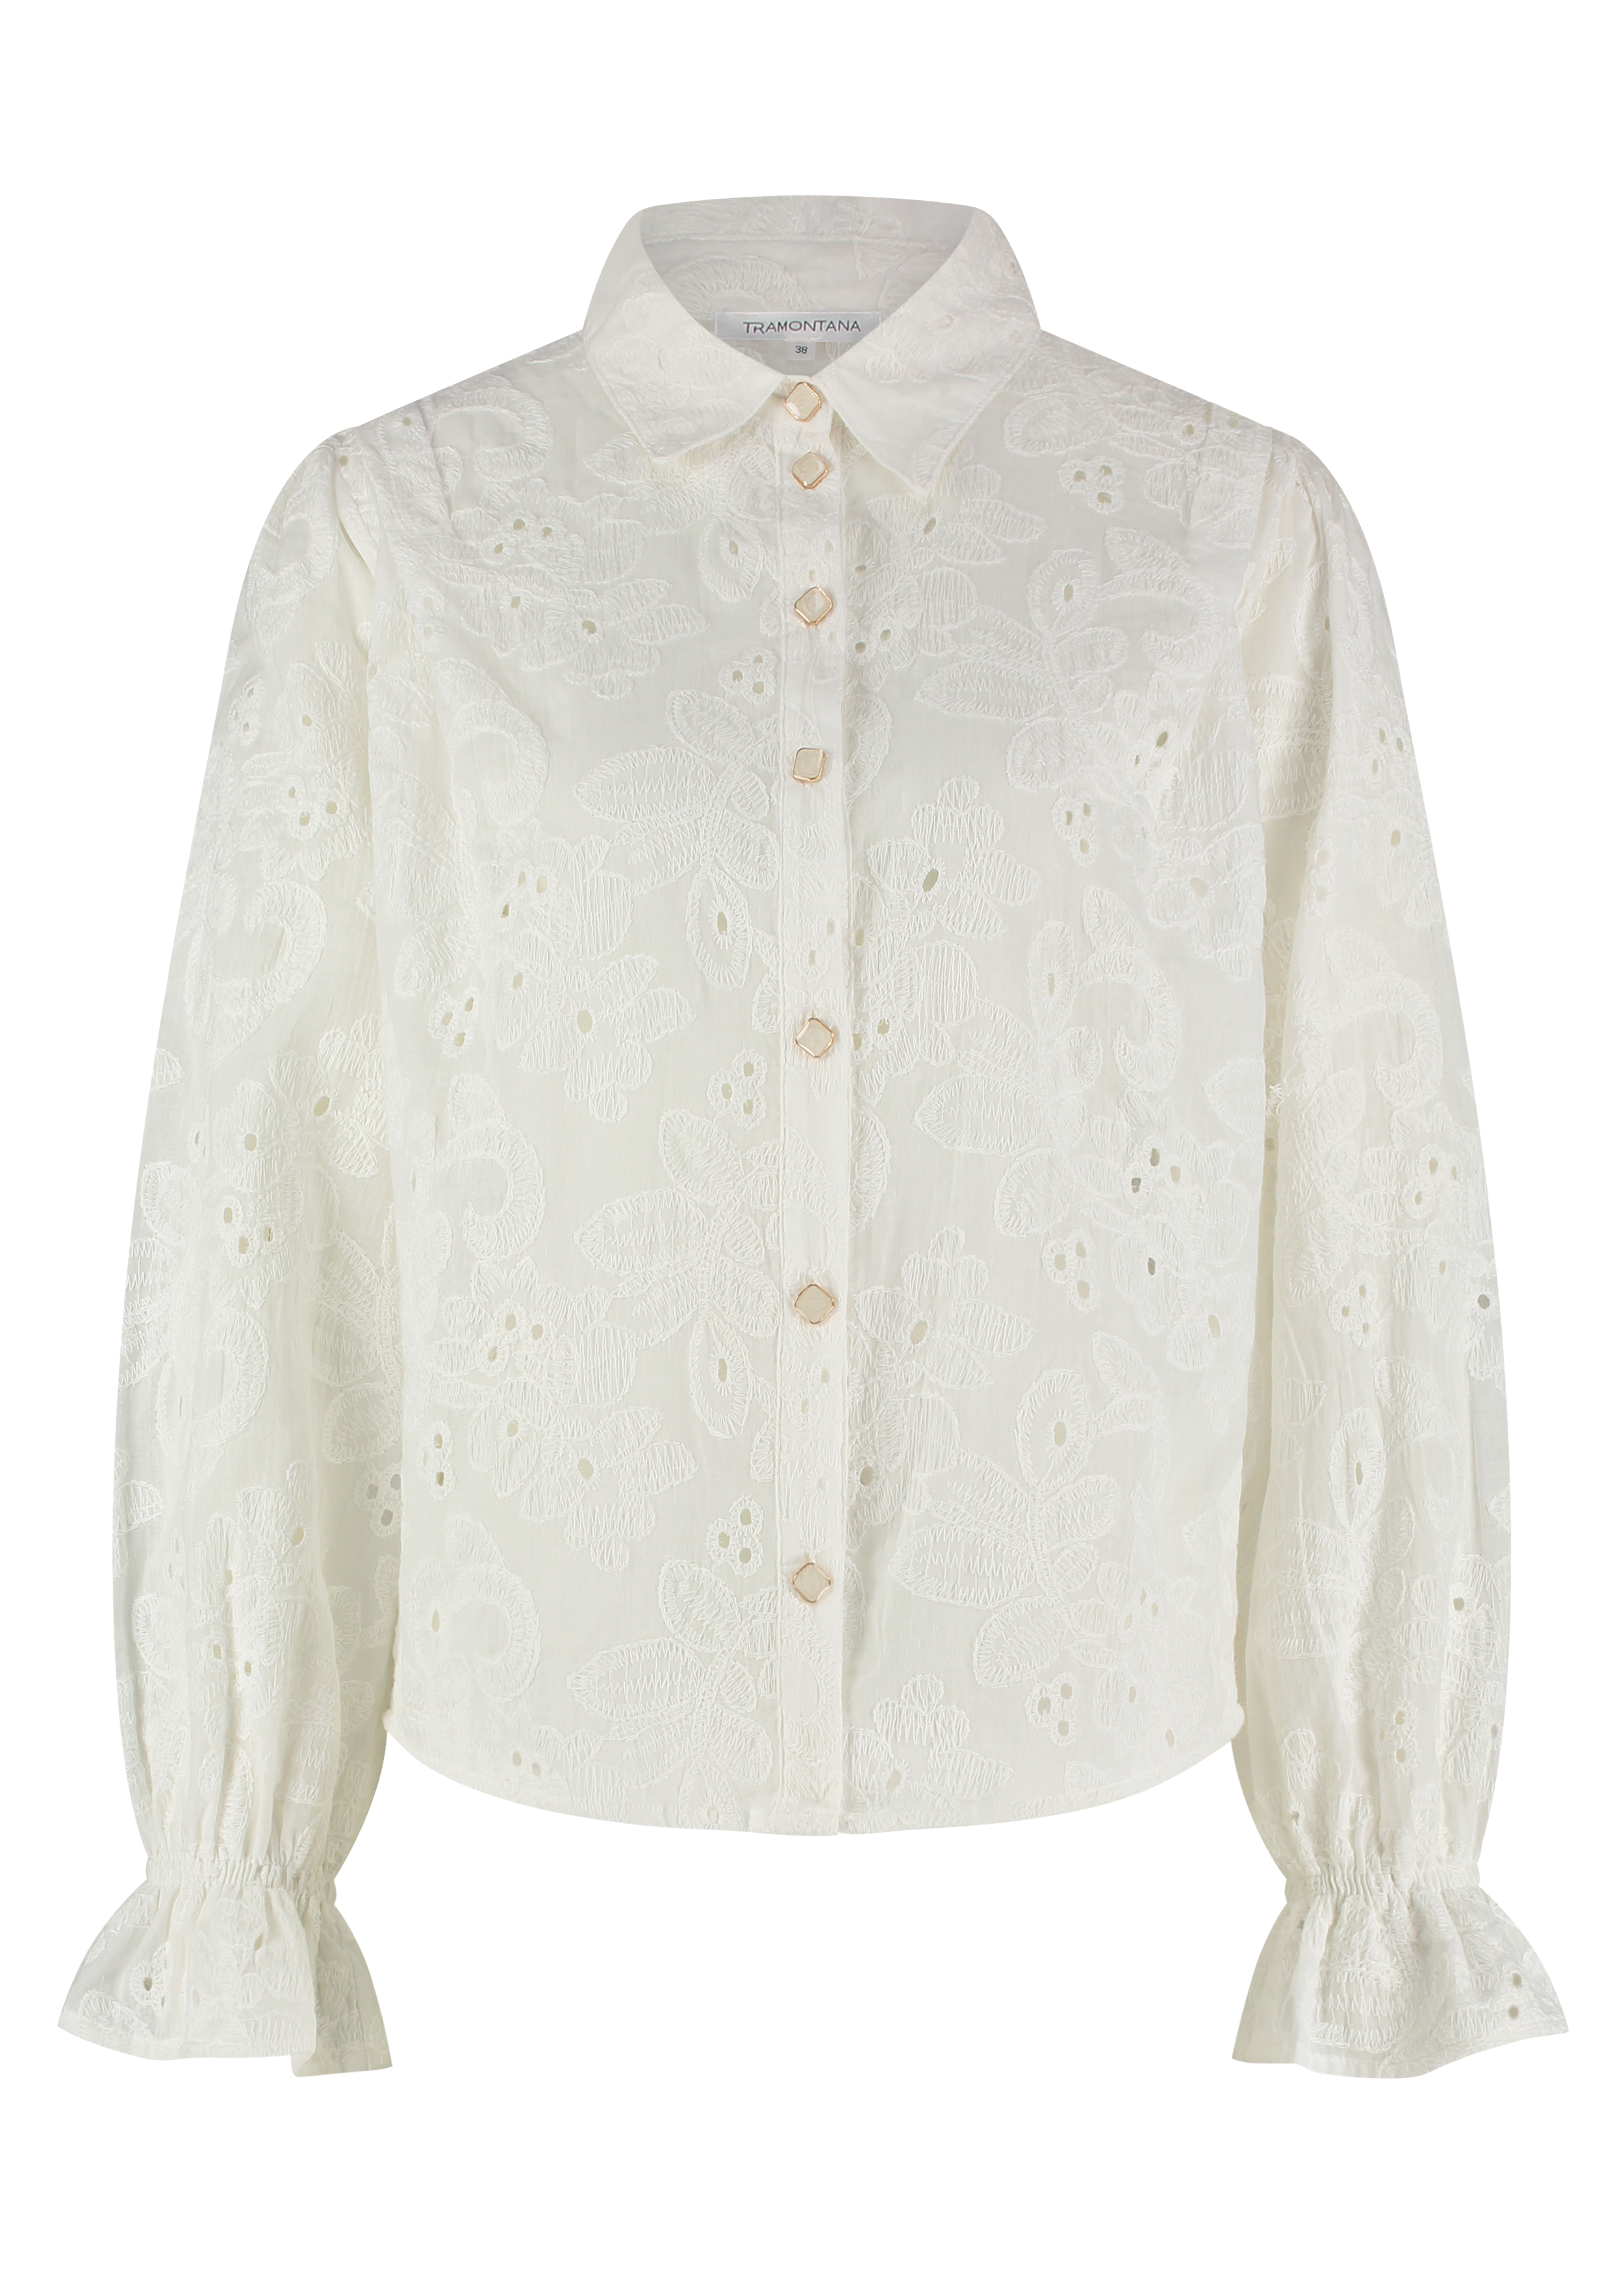 Tramontana Female Blouses Q17-11-301 Blouse Brodery